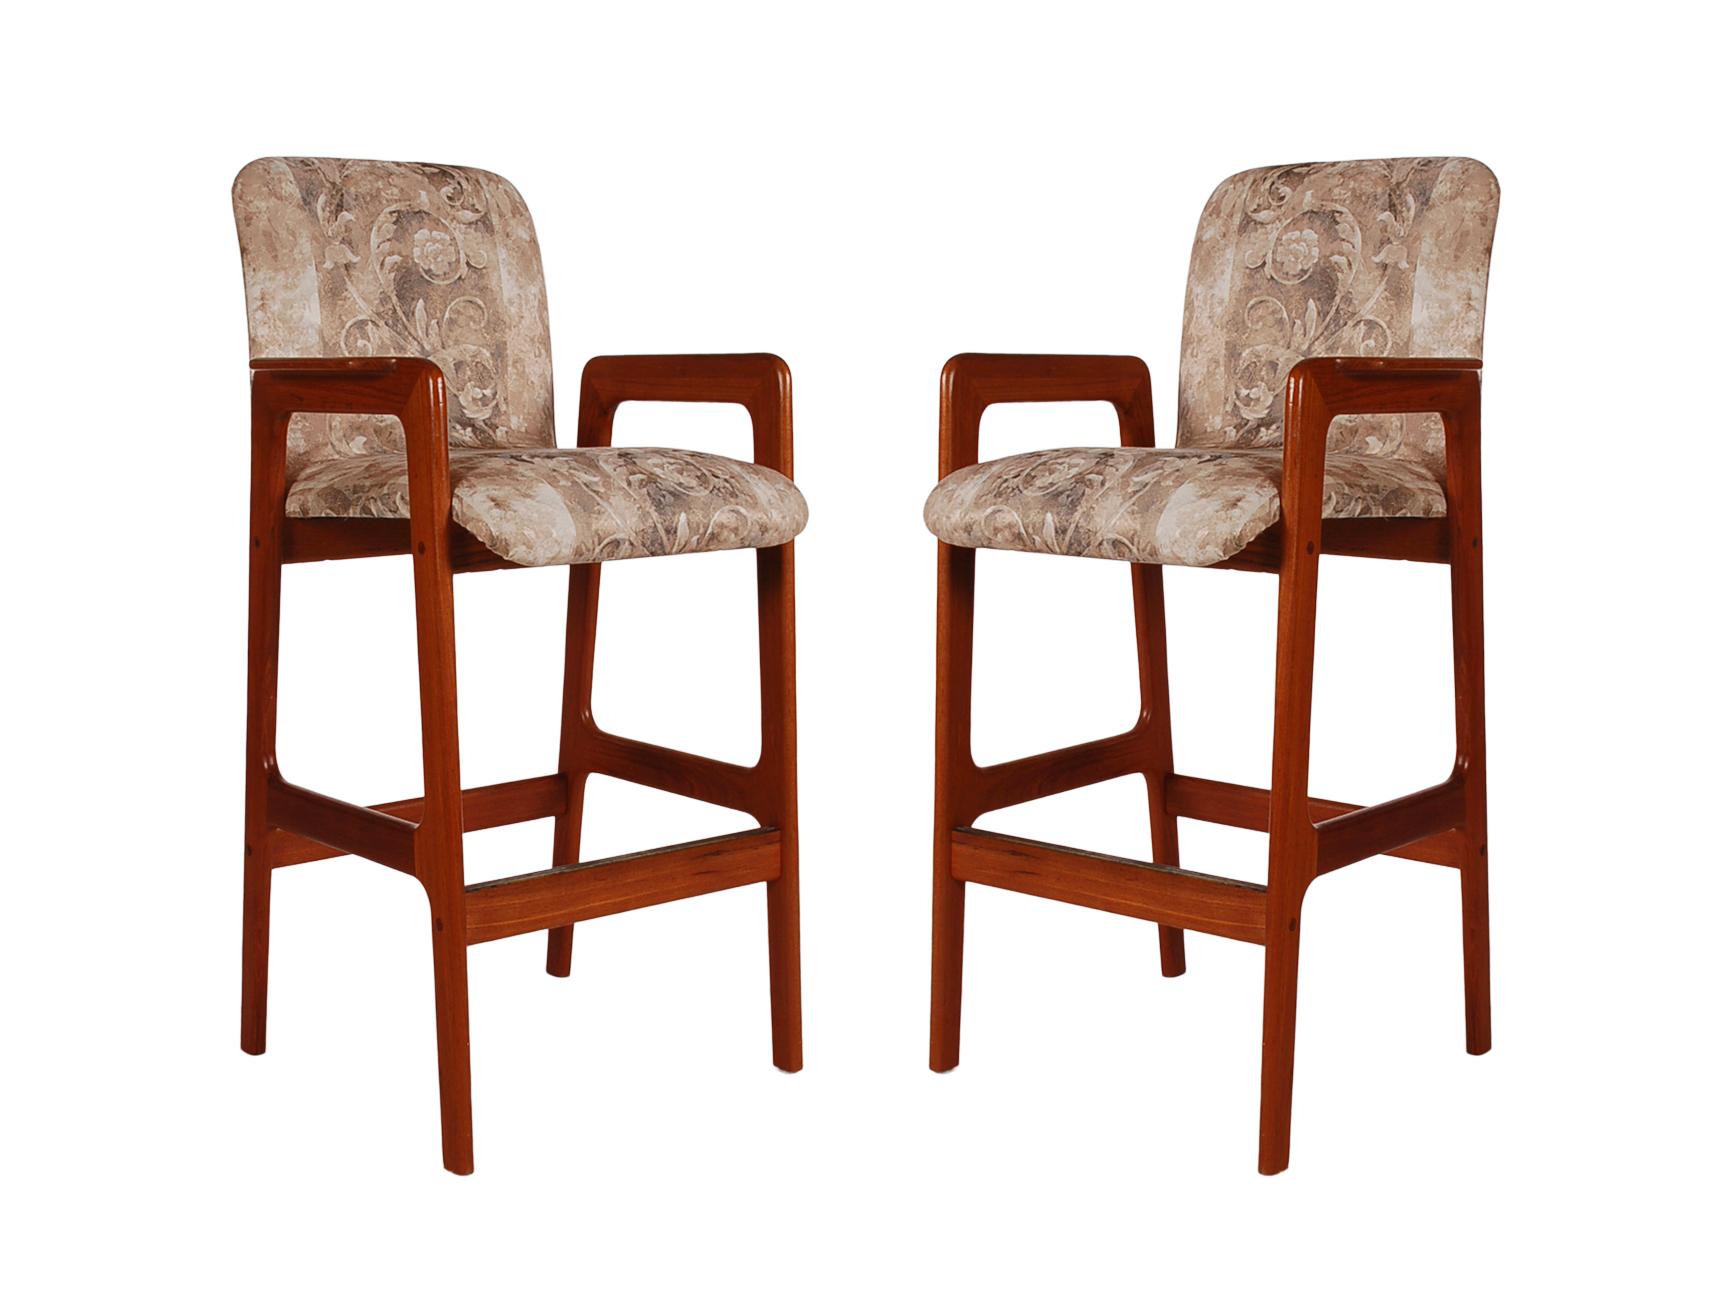 Late 20th Century Midcentury Danish Modern Set of 3 Teak Bar or Counter Stools by Benny Linden